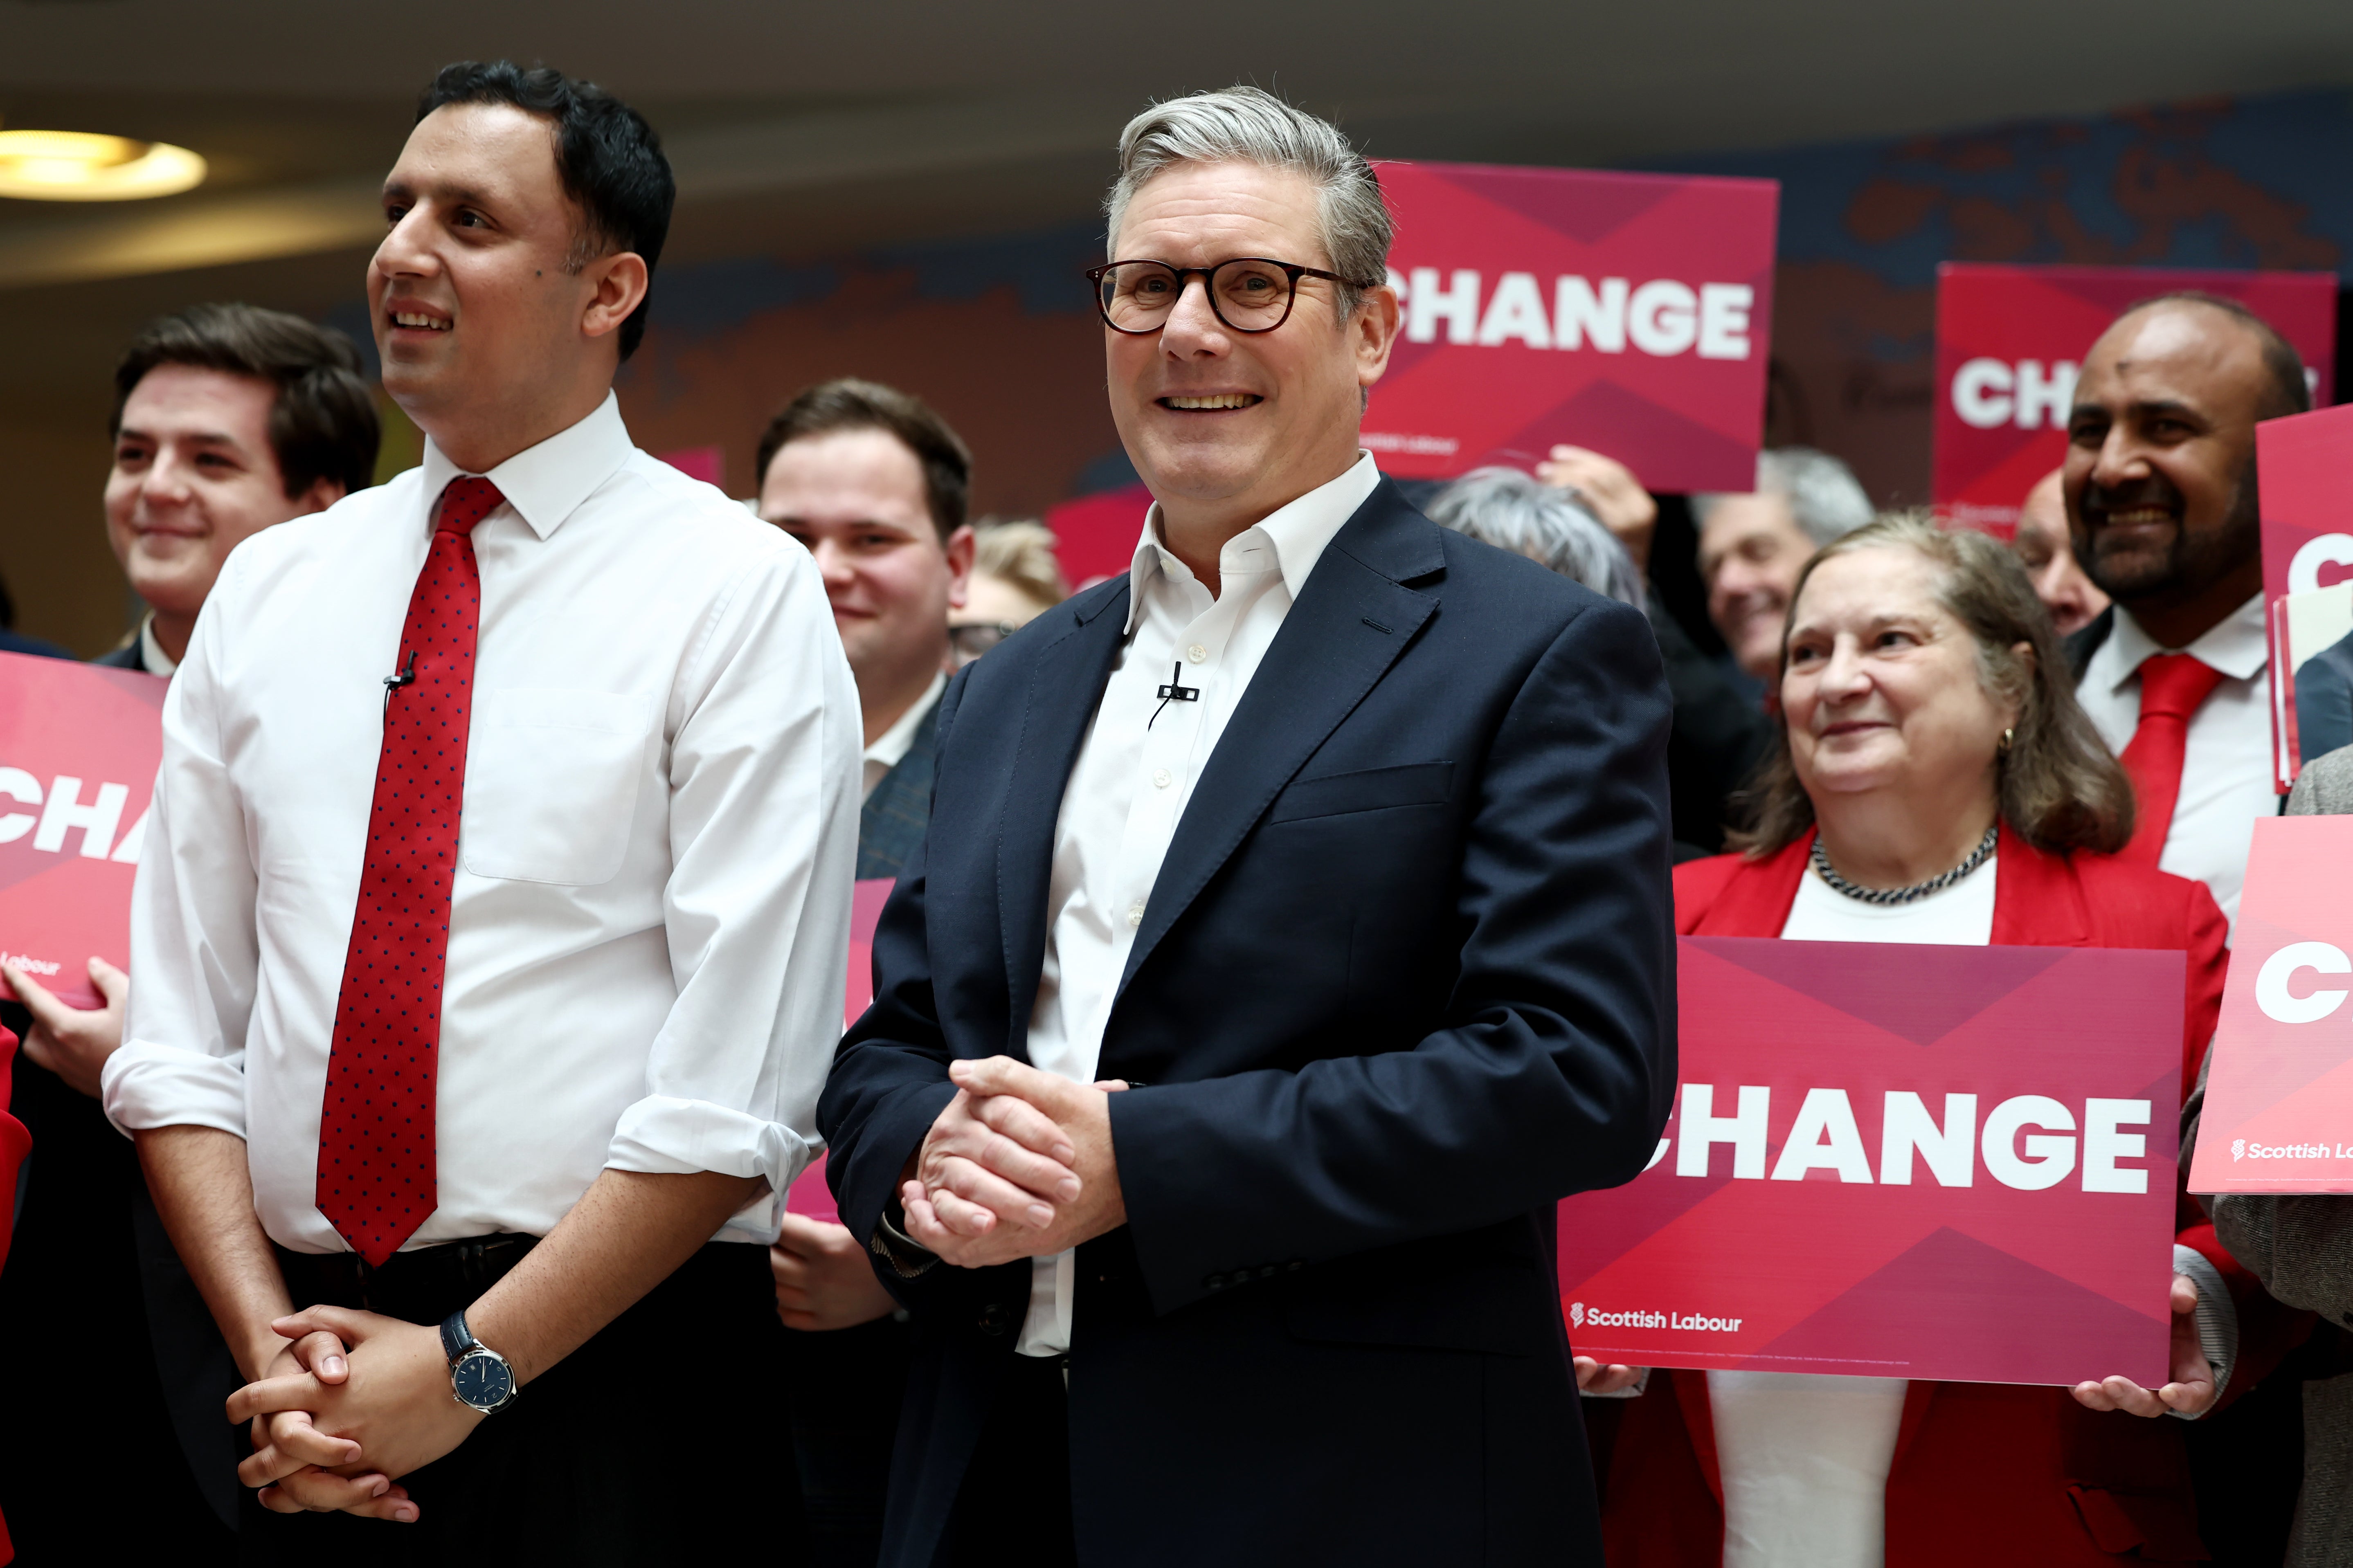 Starmer joins Anas Sarwar in the launch of Labour’s general election campaign in Scotland